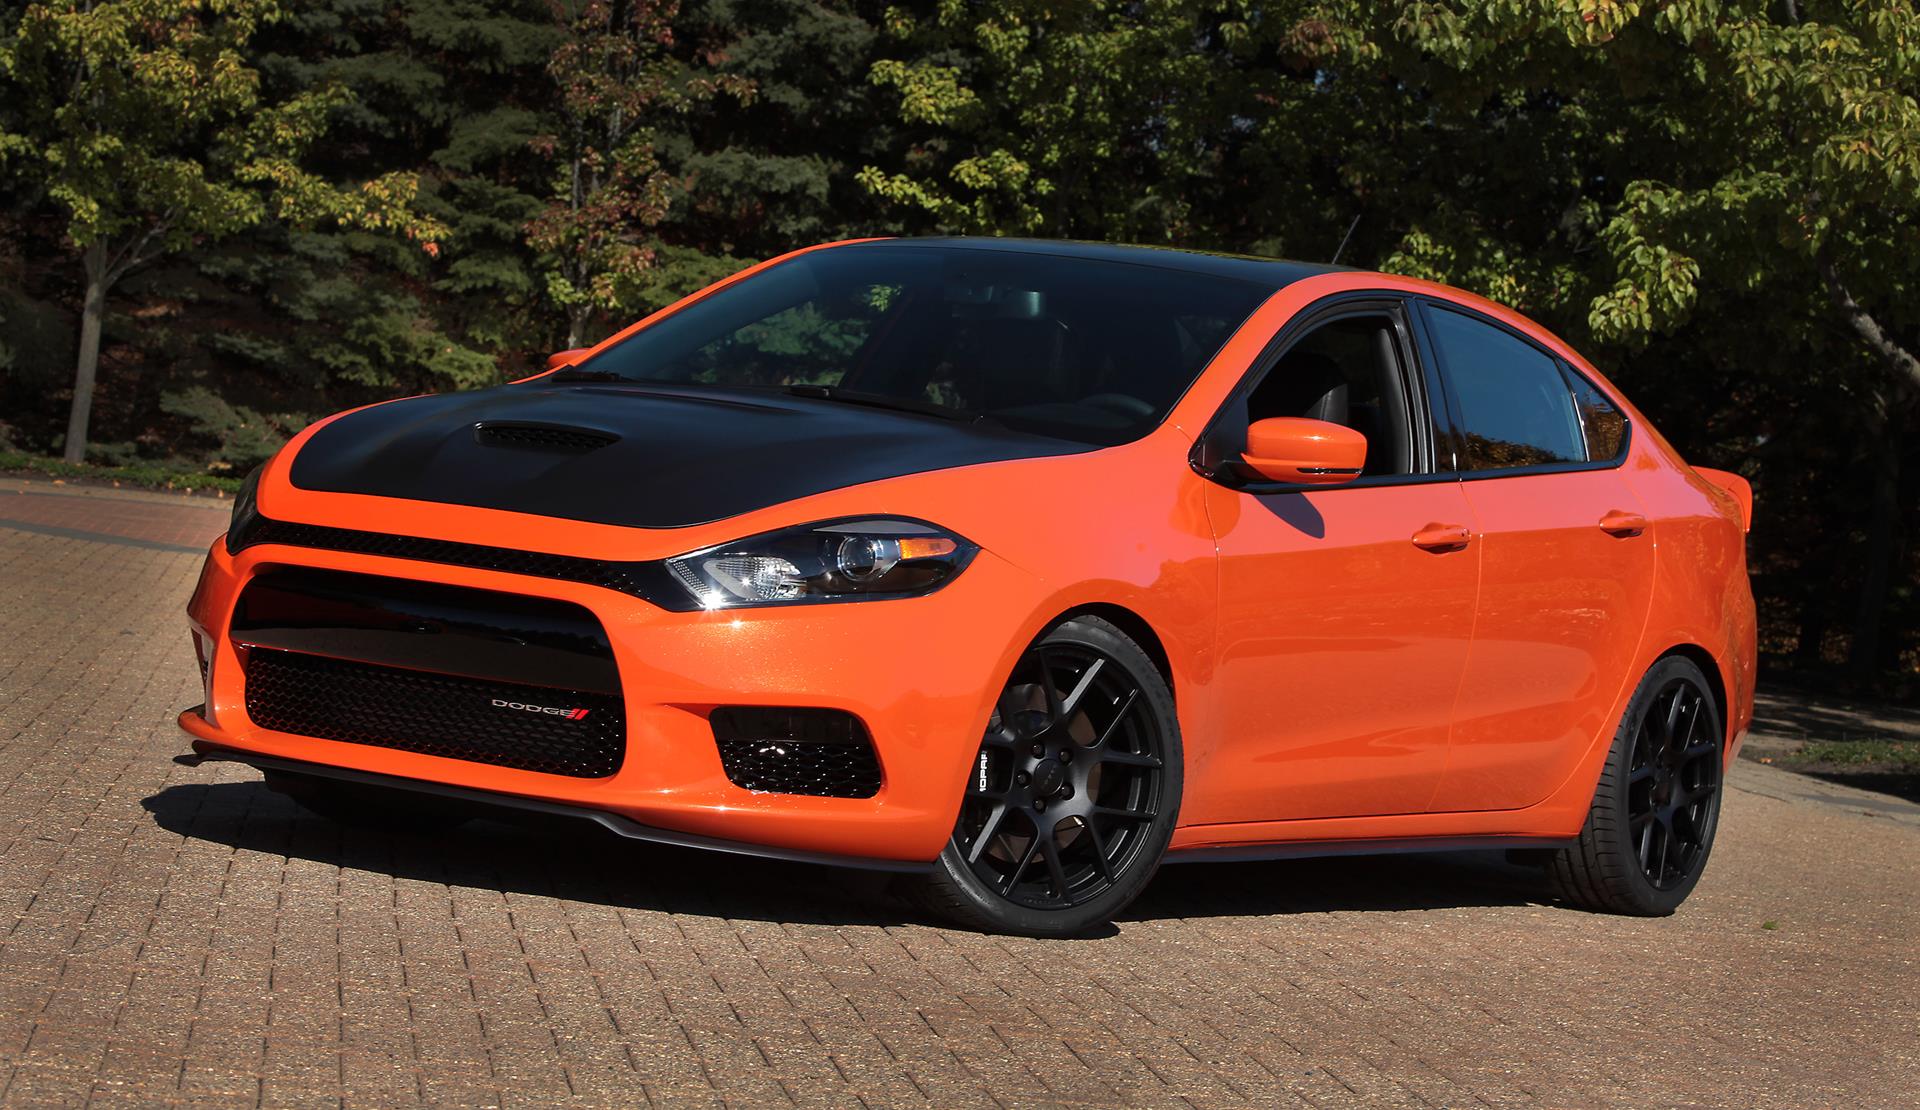 2014 Dodge Dart R/T Concept News and Information, Research, and Pricing